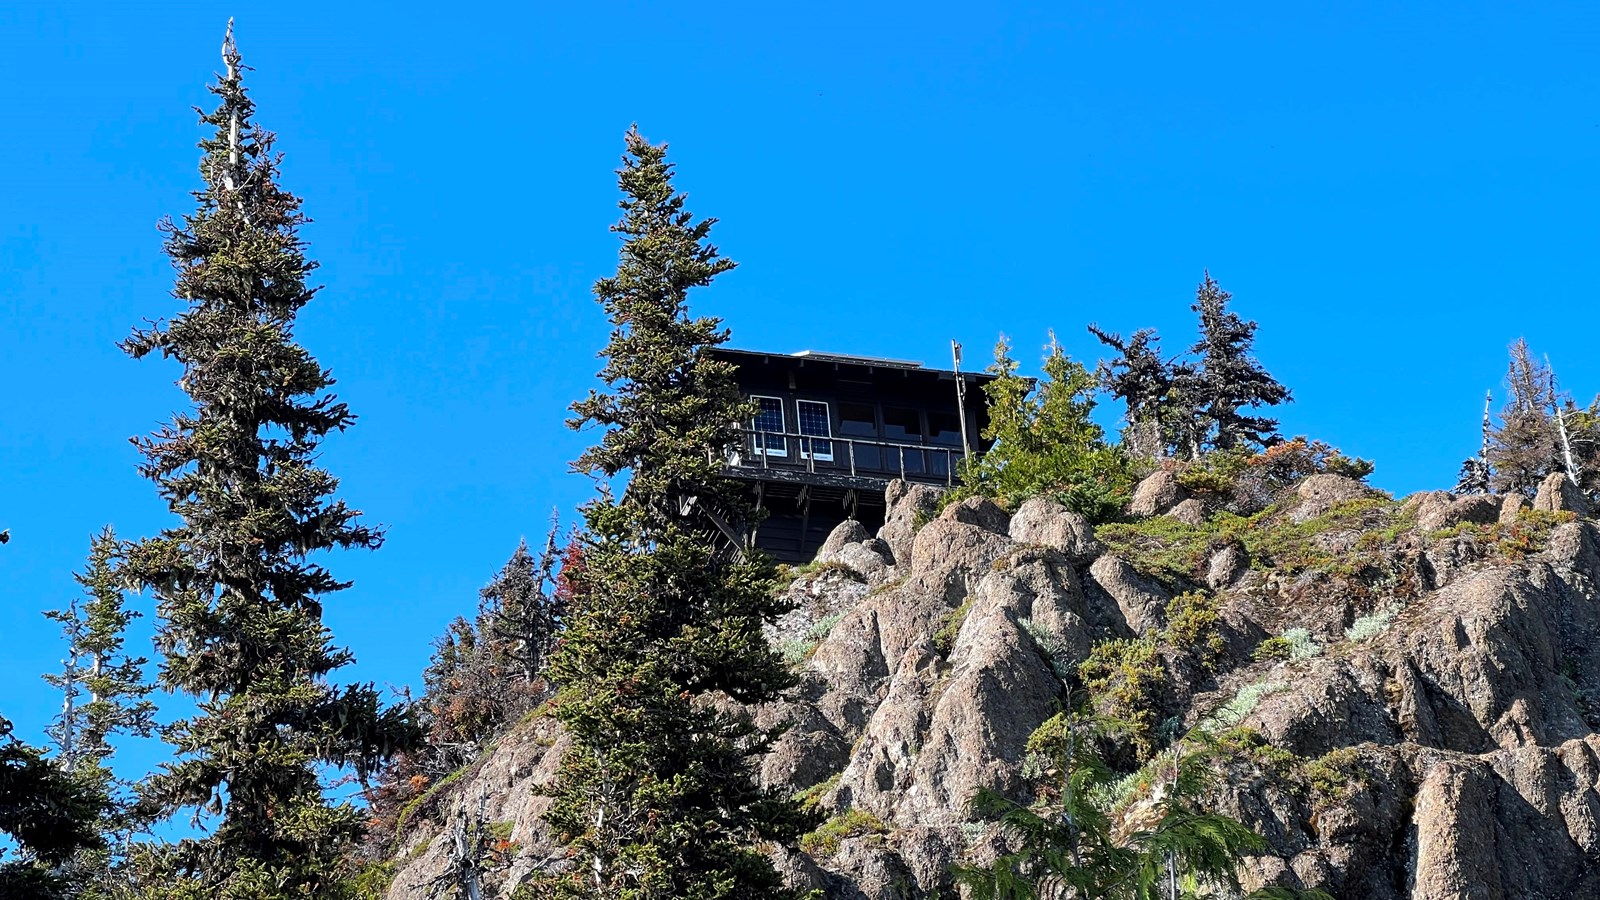 A wooden fire lookout sits upon rocks with conifer trees surrounding it